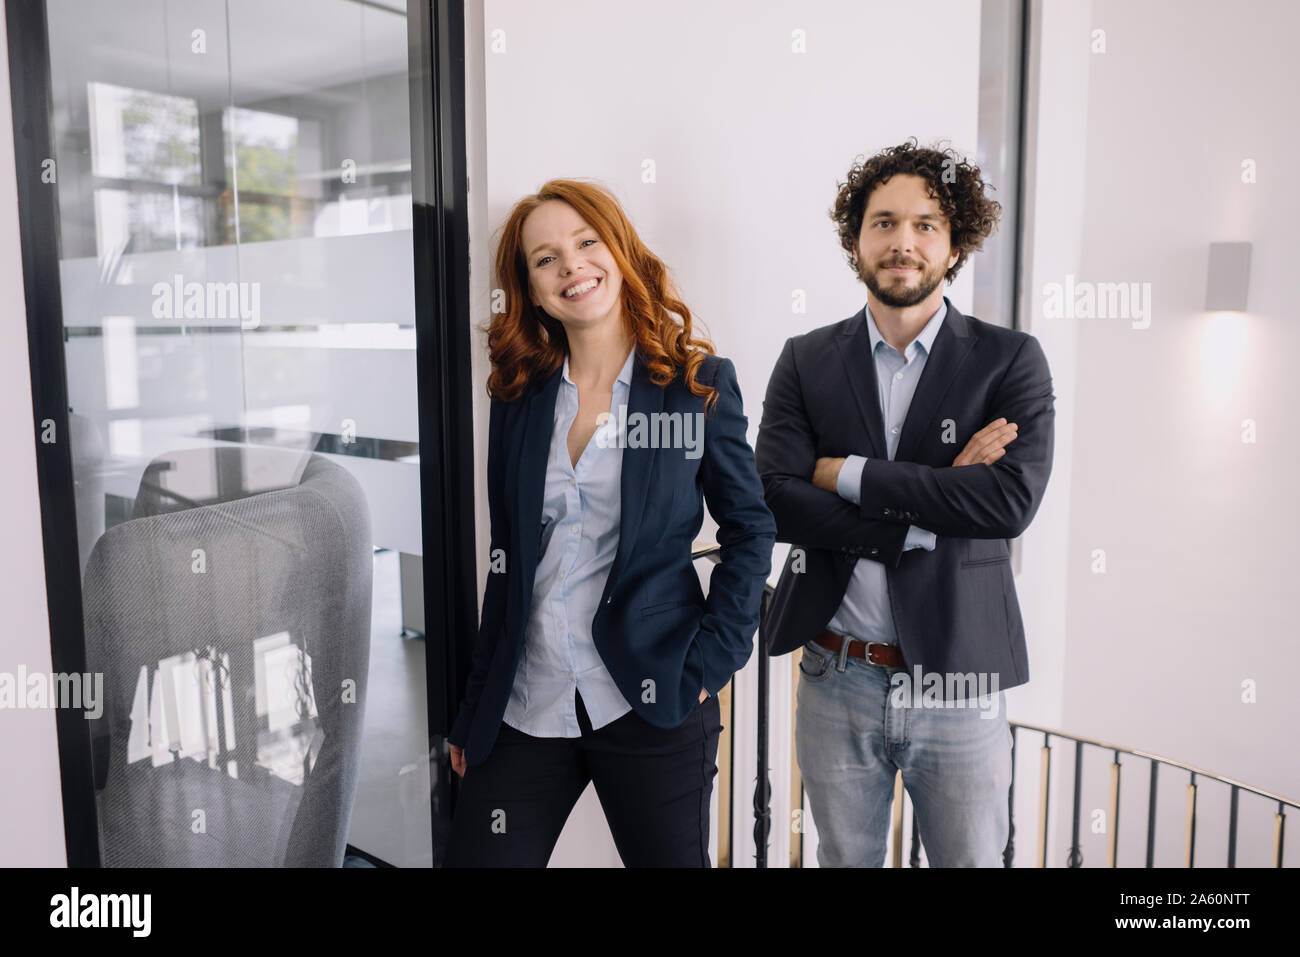 Portrait of businessman and businesswoman in office Banque D'Images